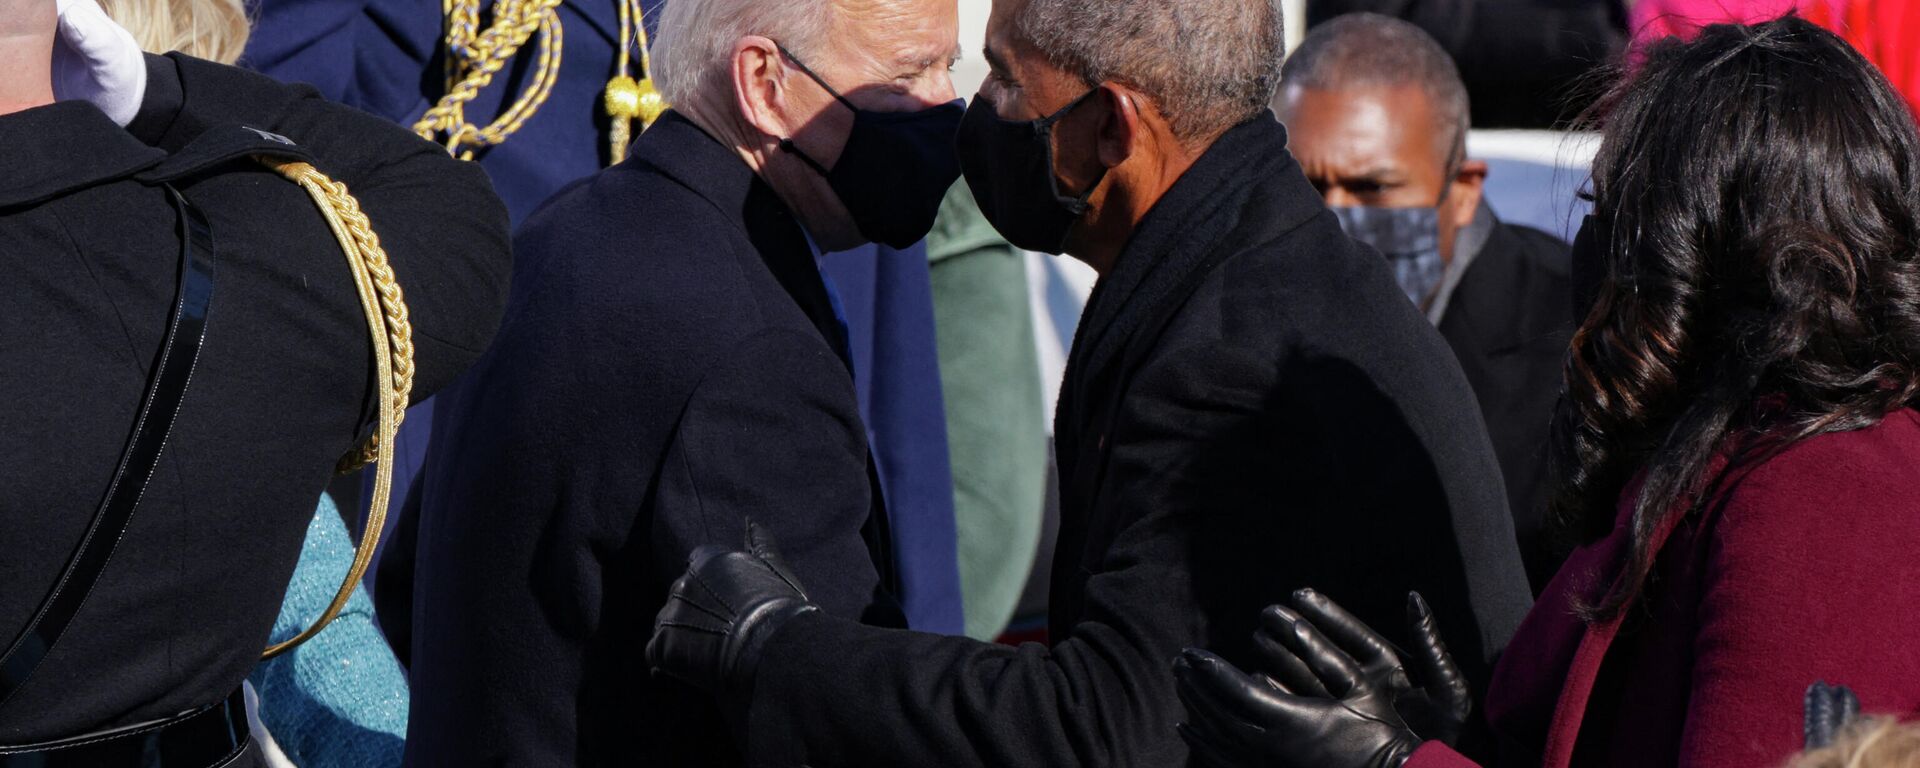 Biden's inauguration on the West Front of the U.S. Capitol on January 20, 2021 in Washington, DC. - Sputnik International, 1920, 17.10.2021